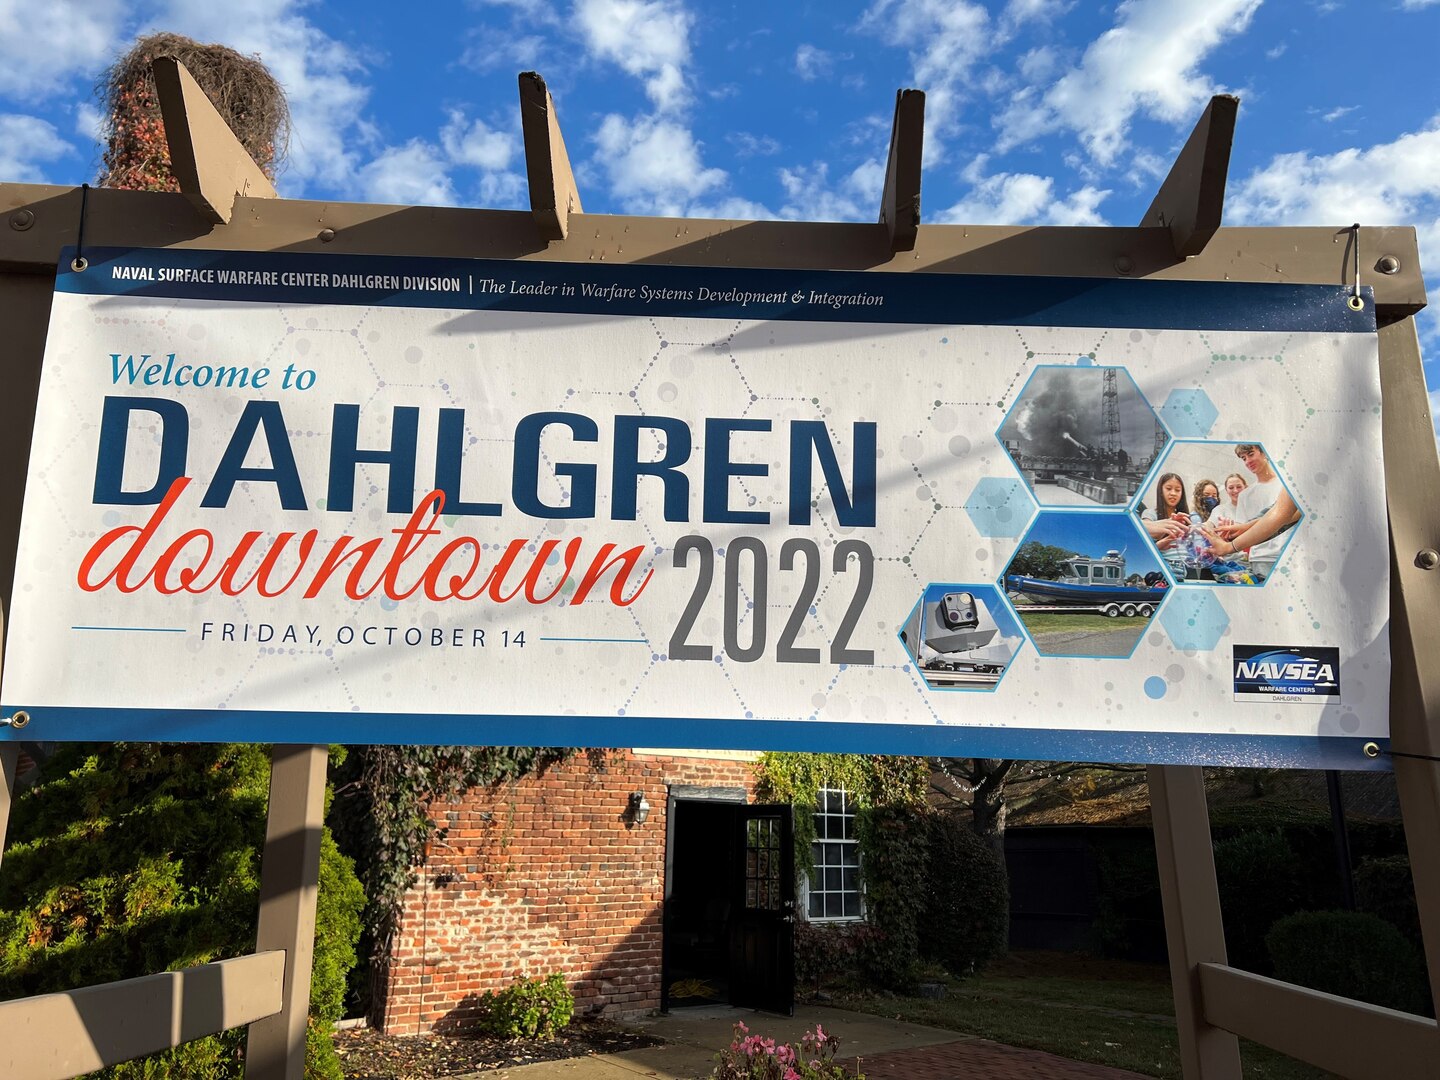 IMAGE: On Oct. 14, Naval Surface Warfare Center Dahlgren Division hosted its first Dahlgren Downtown event at the Inn at the Old Silk Mill in Downtown Fredericksburg.